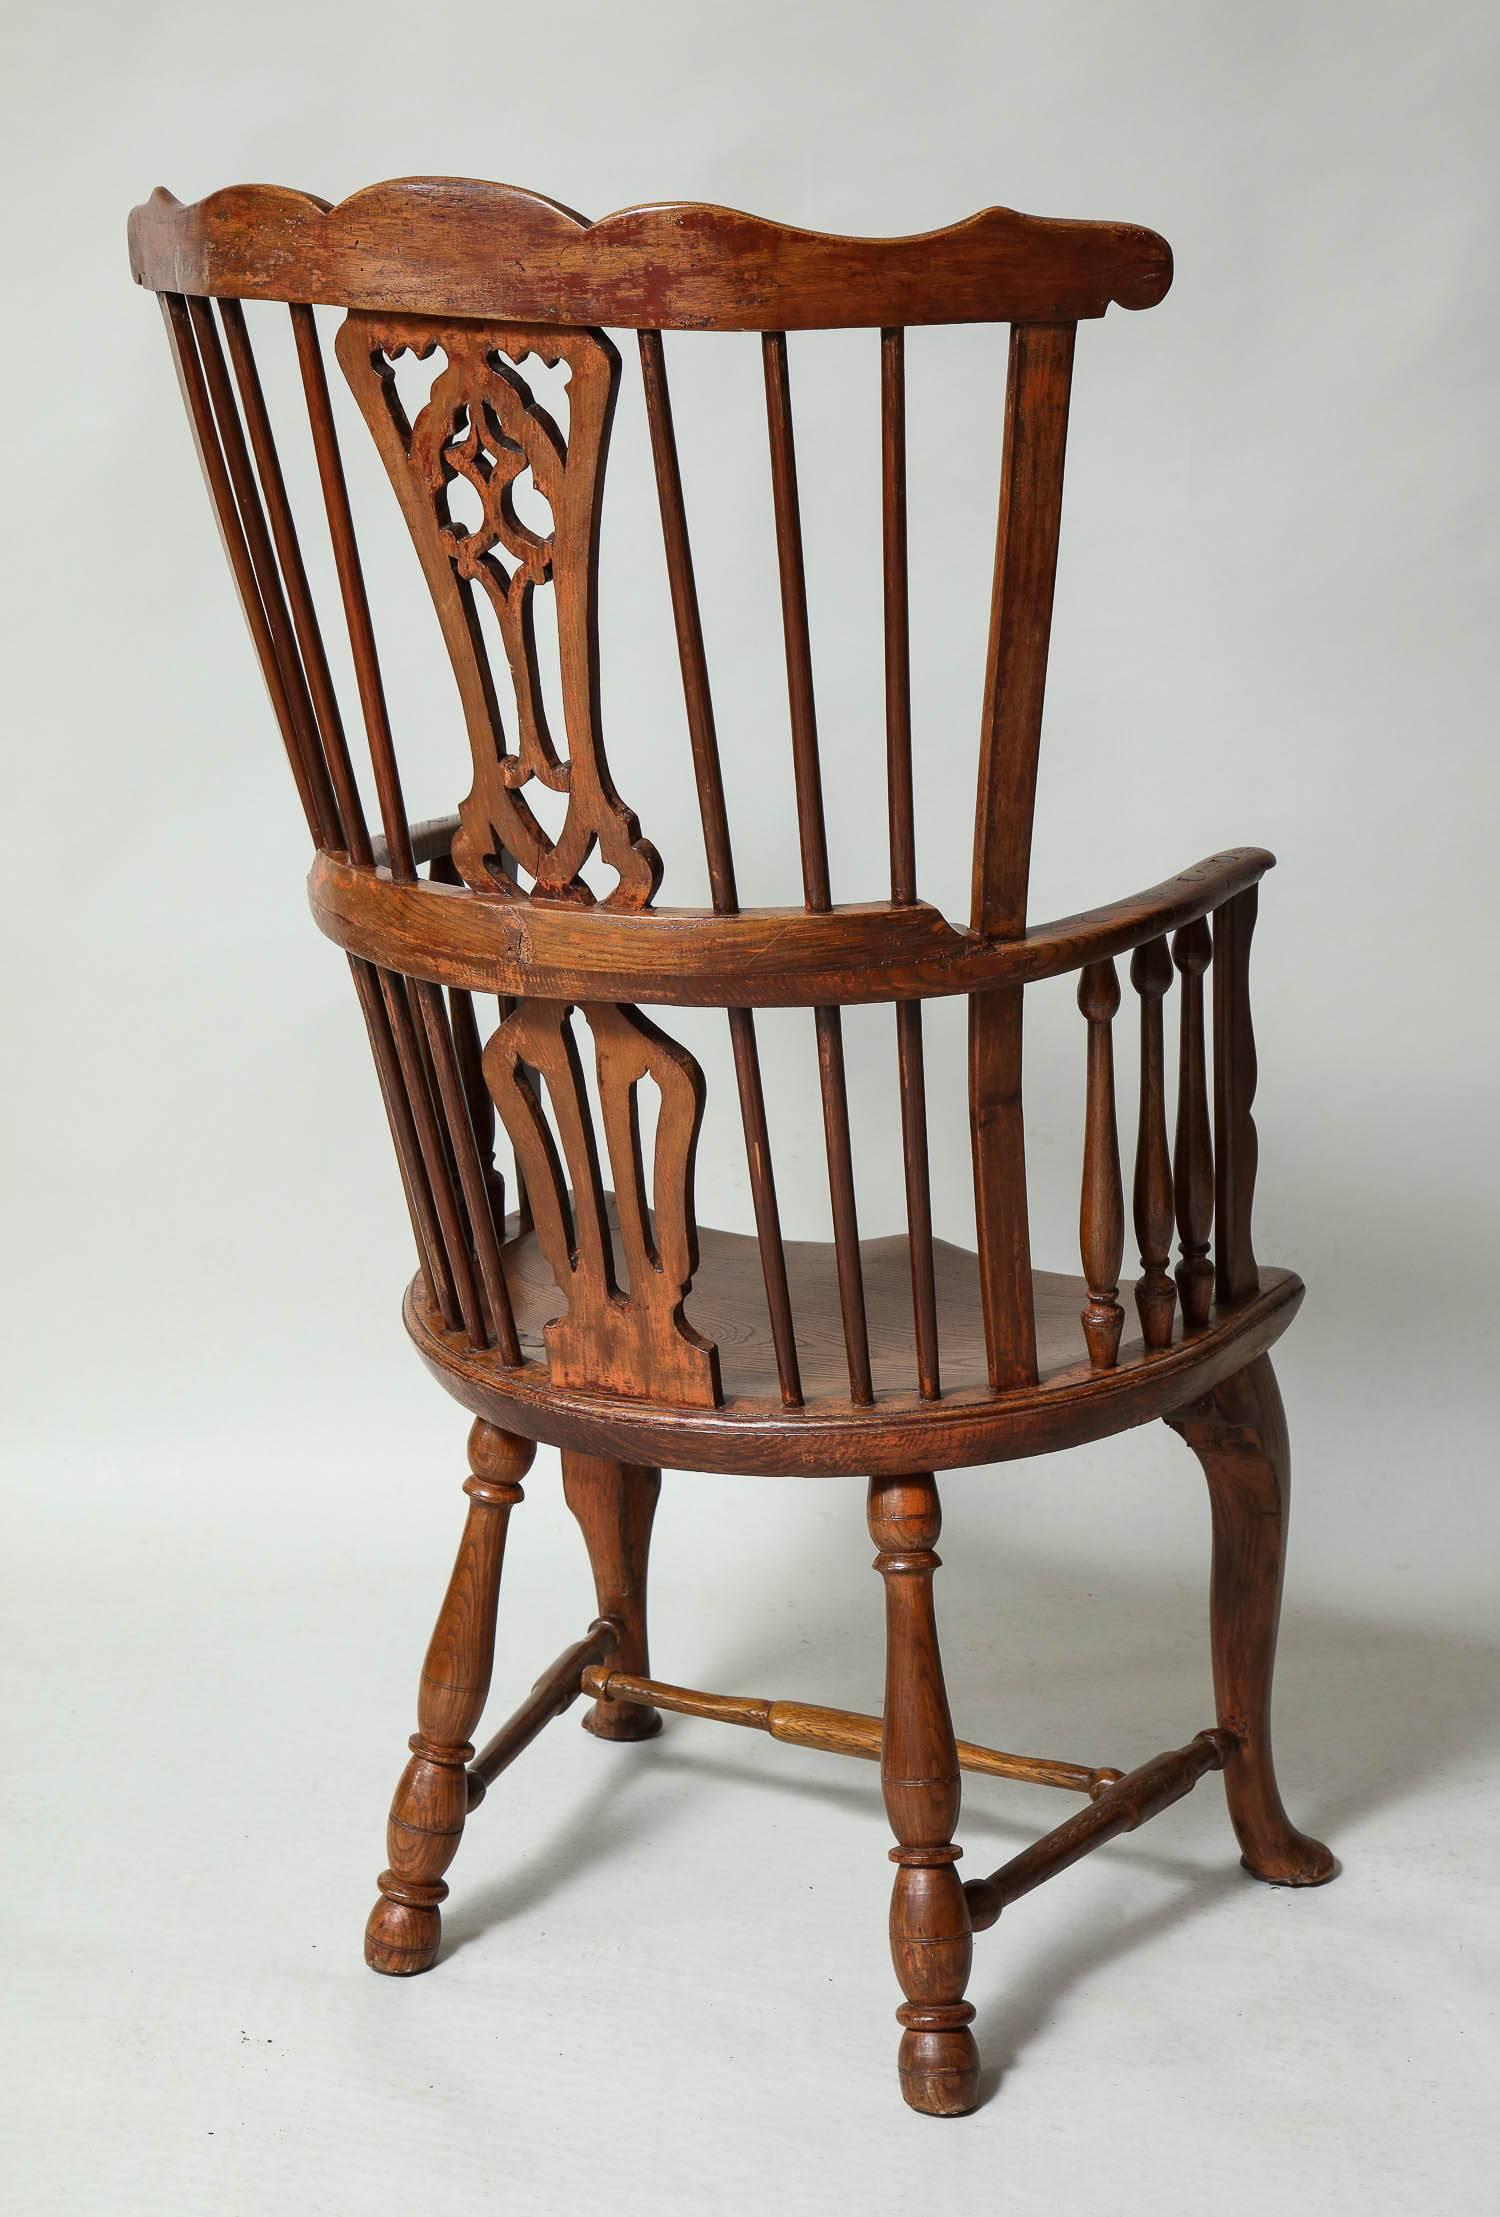 George II Exceptional 18th Century Windsor Armchair